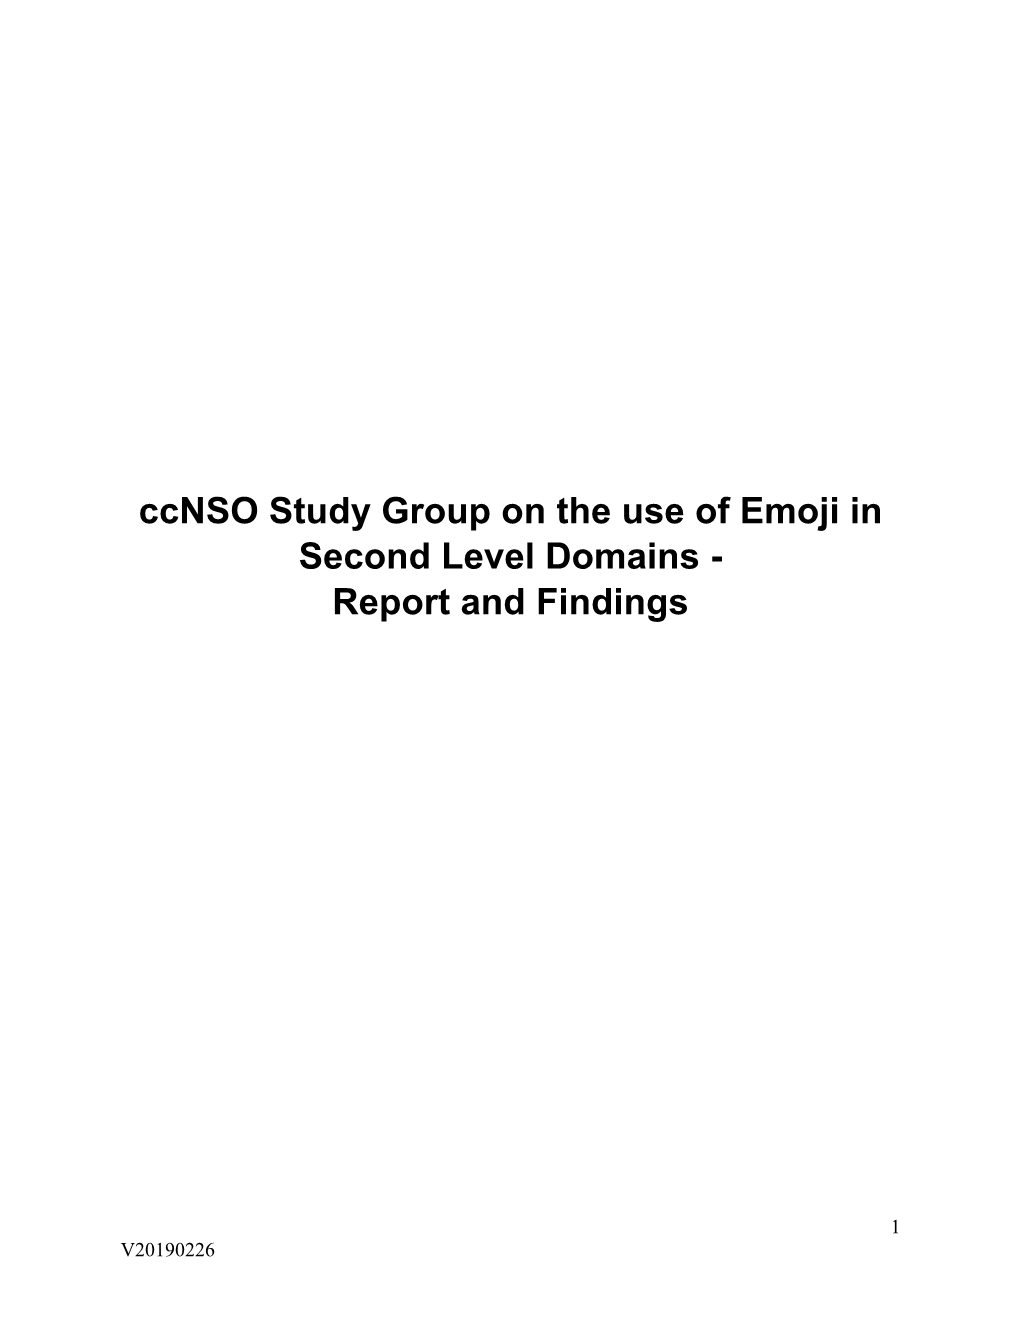 Ccnso Study Group on the Use of Emoji in Second Level Domains - Report and Findings